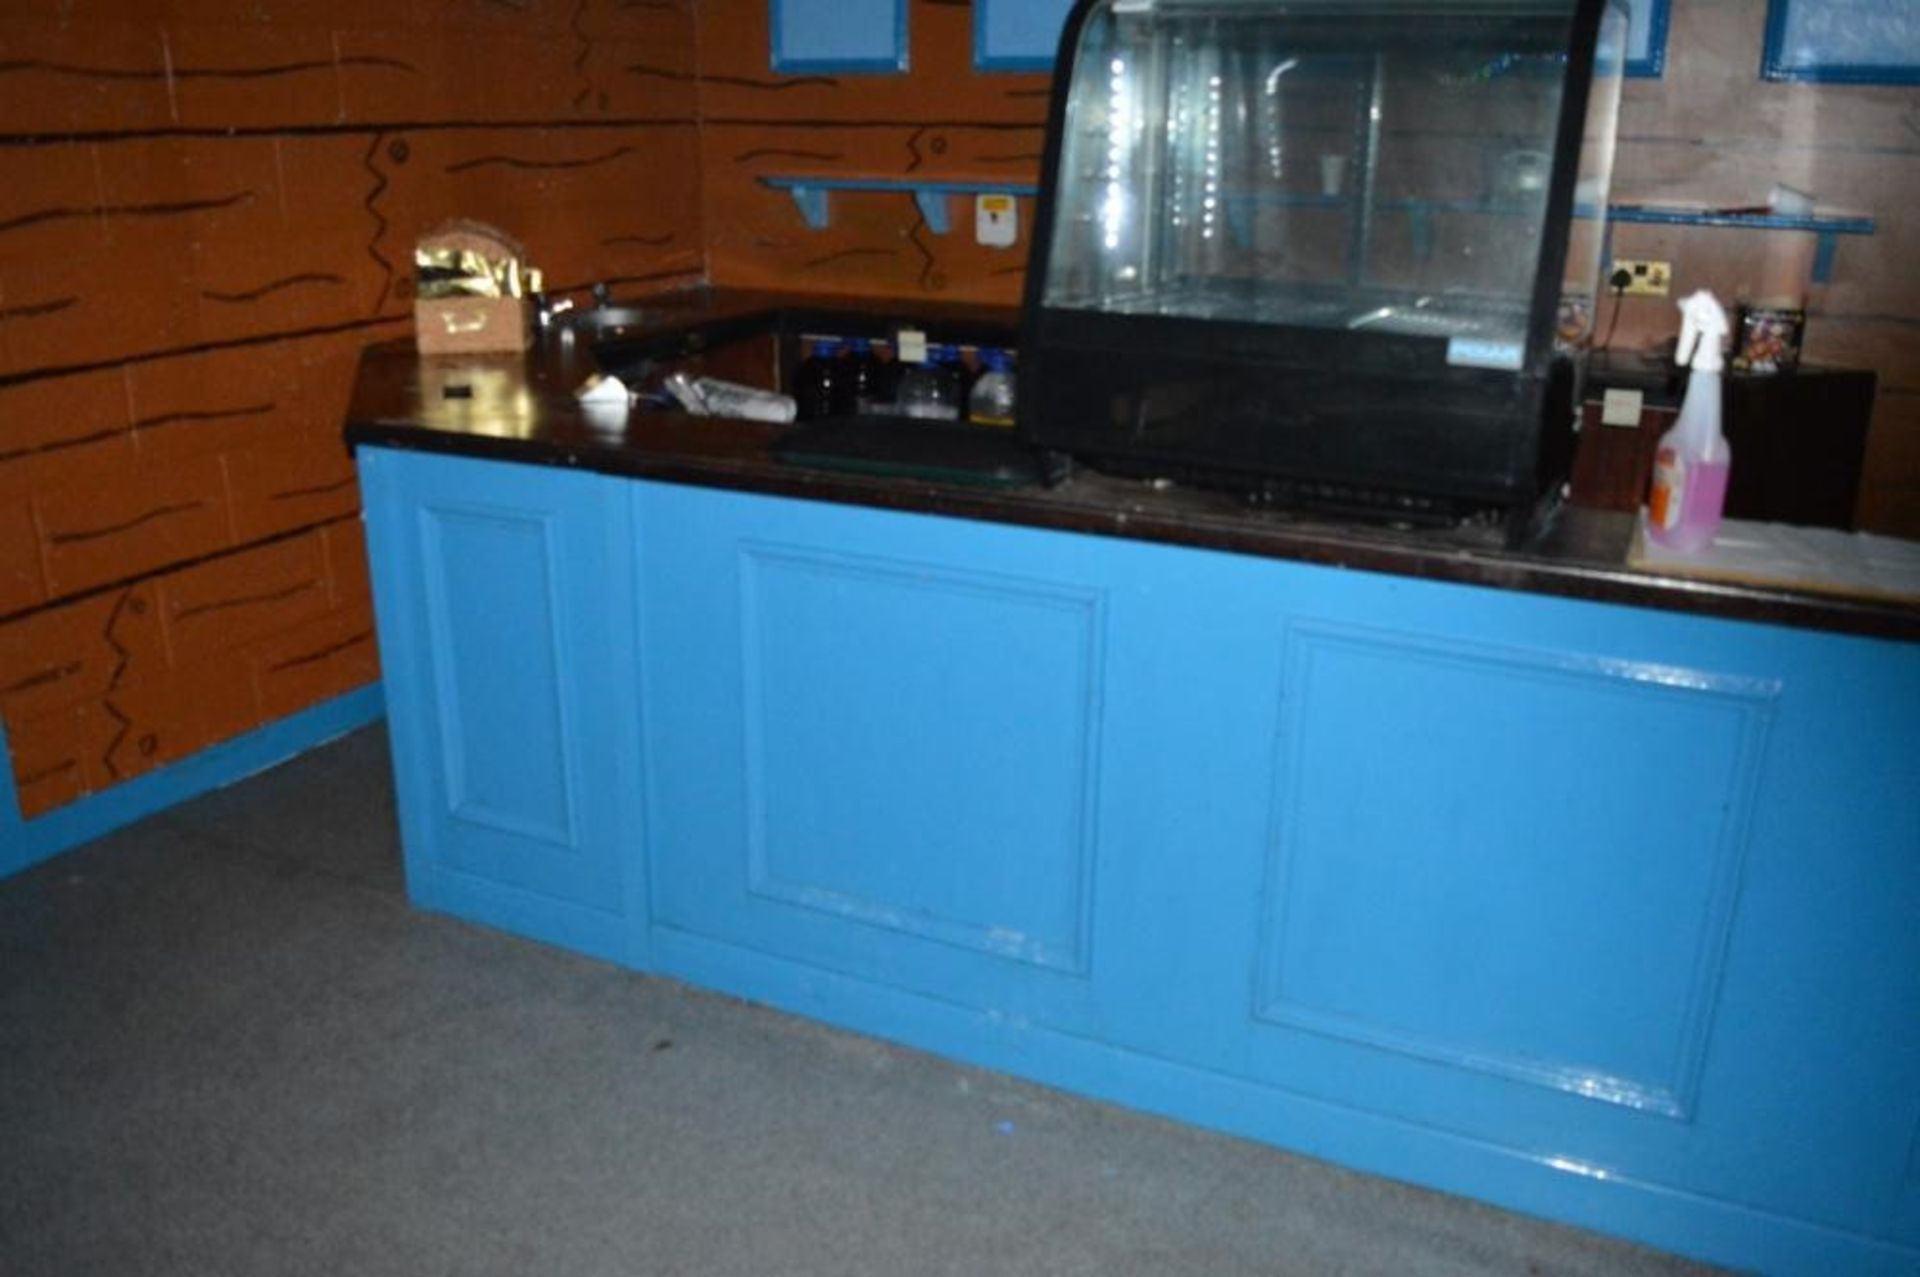 1 x Drinks Bar in Blue With Wooden Counter Top - Includes Backbar Storage and Single Handwash Basin - Image 4 of 11